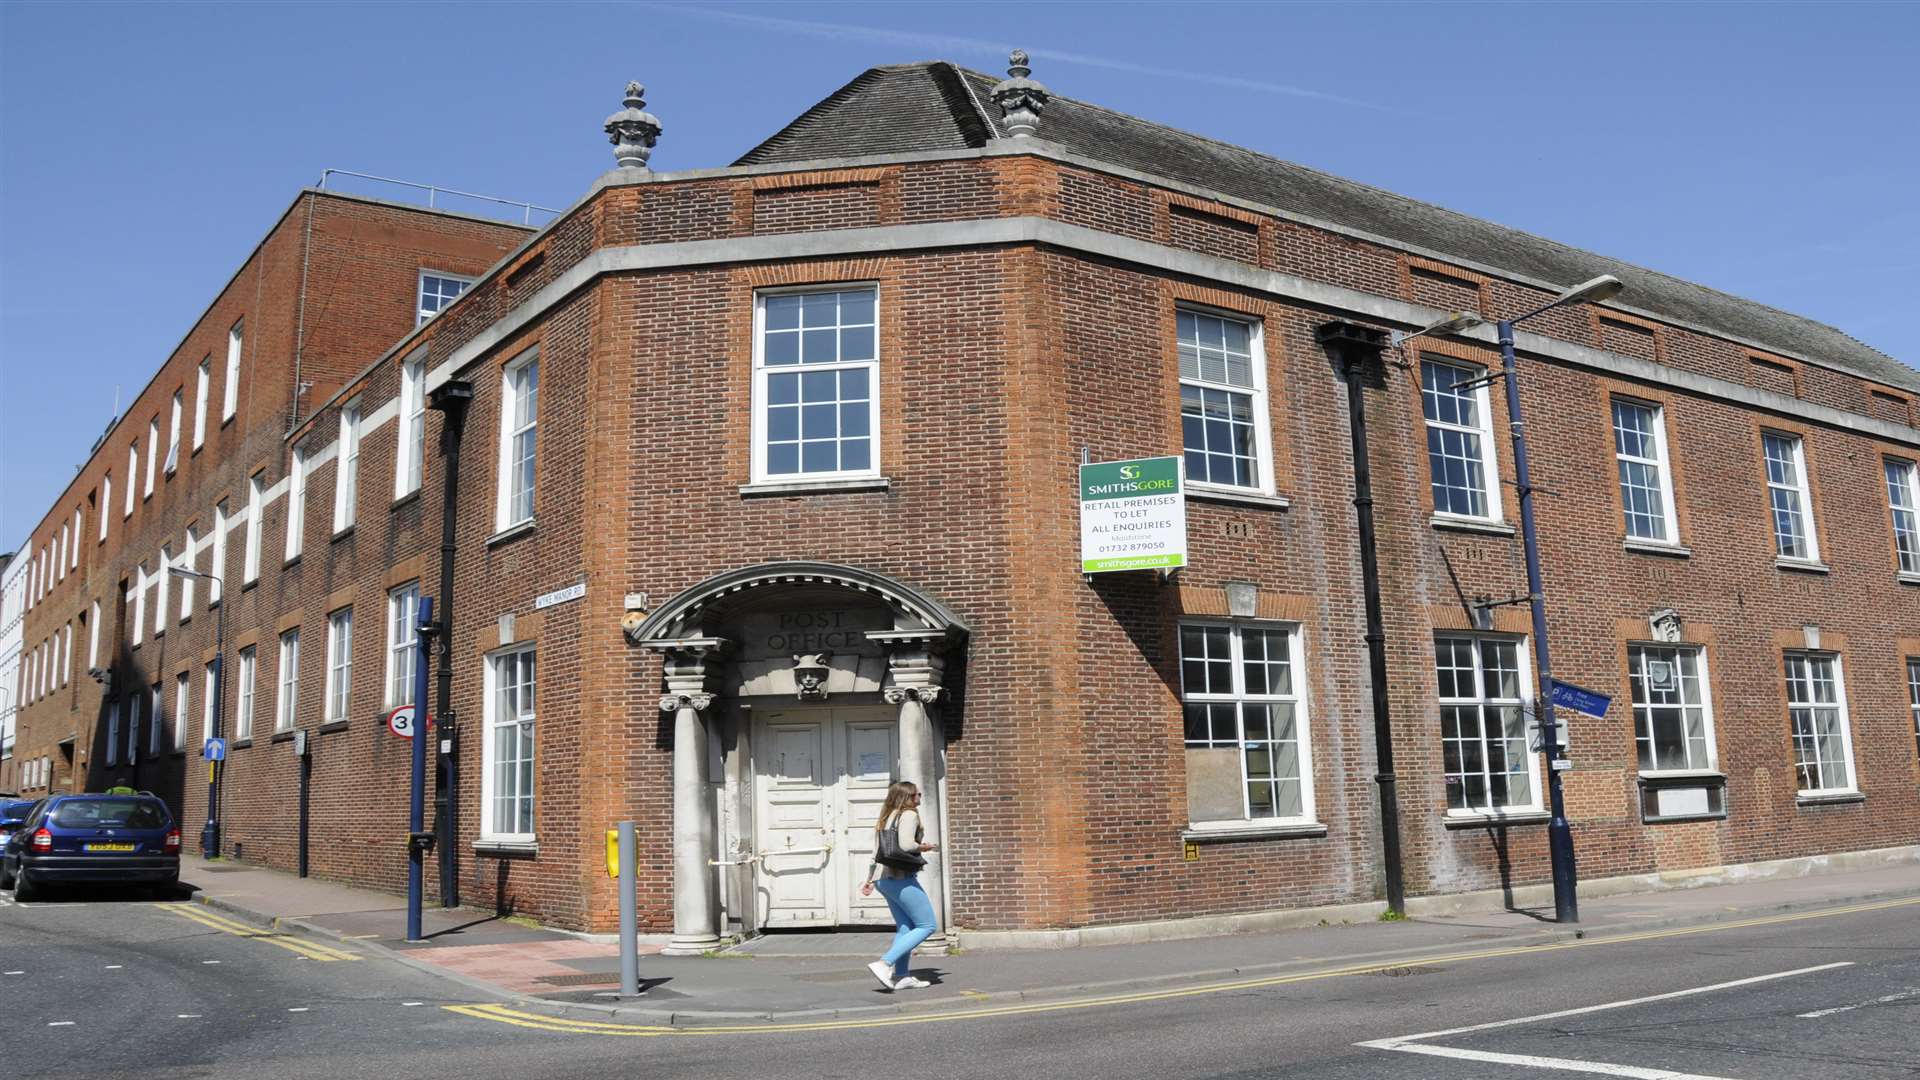 The former post office in King Street, Maidstone